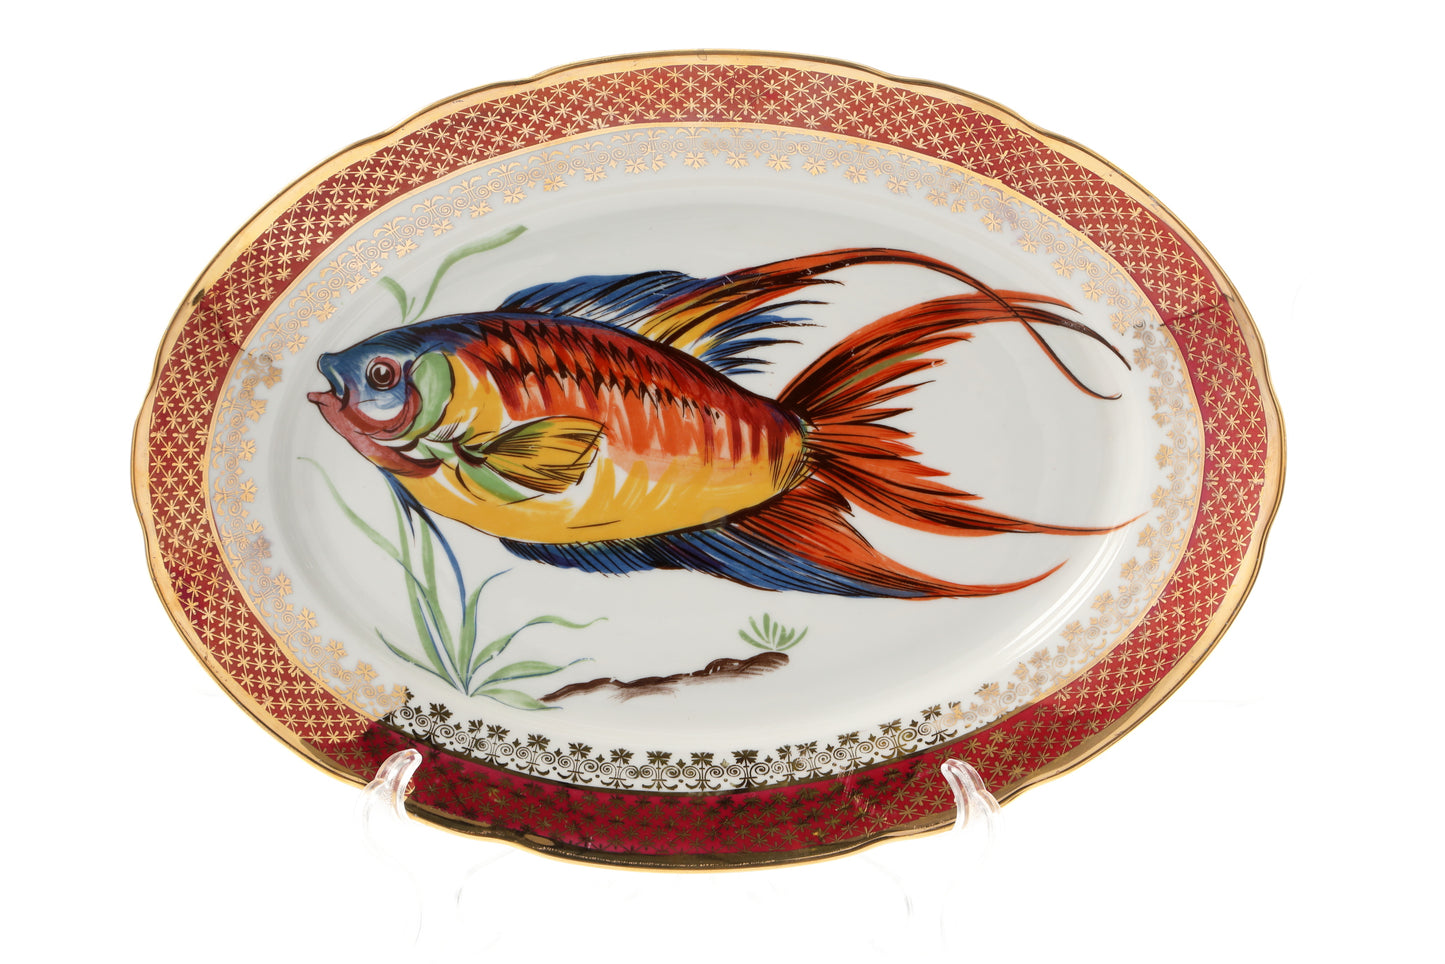 Bavaria fish plate set from the 1950s